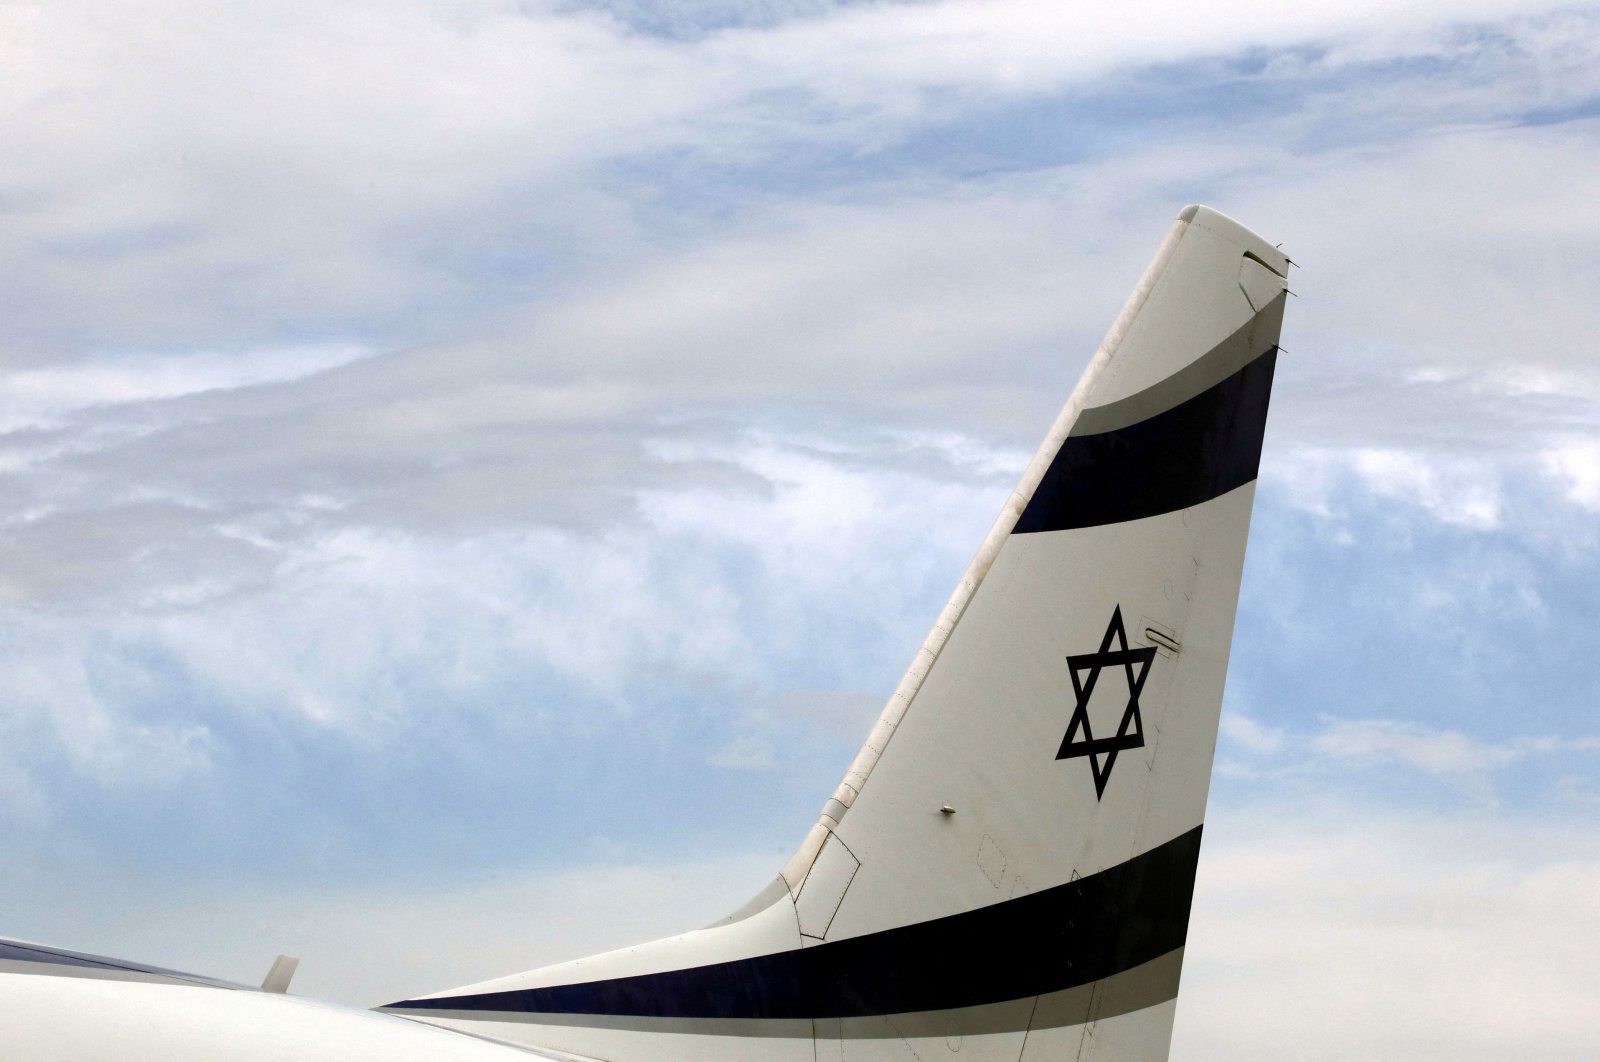 An Israel El Al airlines plane is seen after landing following its inaugural flight between Tel Aviv and Nice at Nice international airport, France, April 4, 2019. (Reuters Photo)